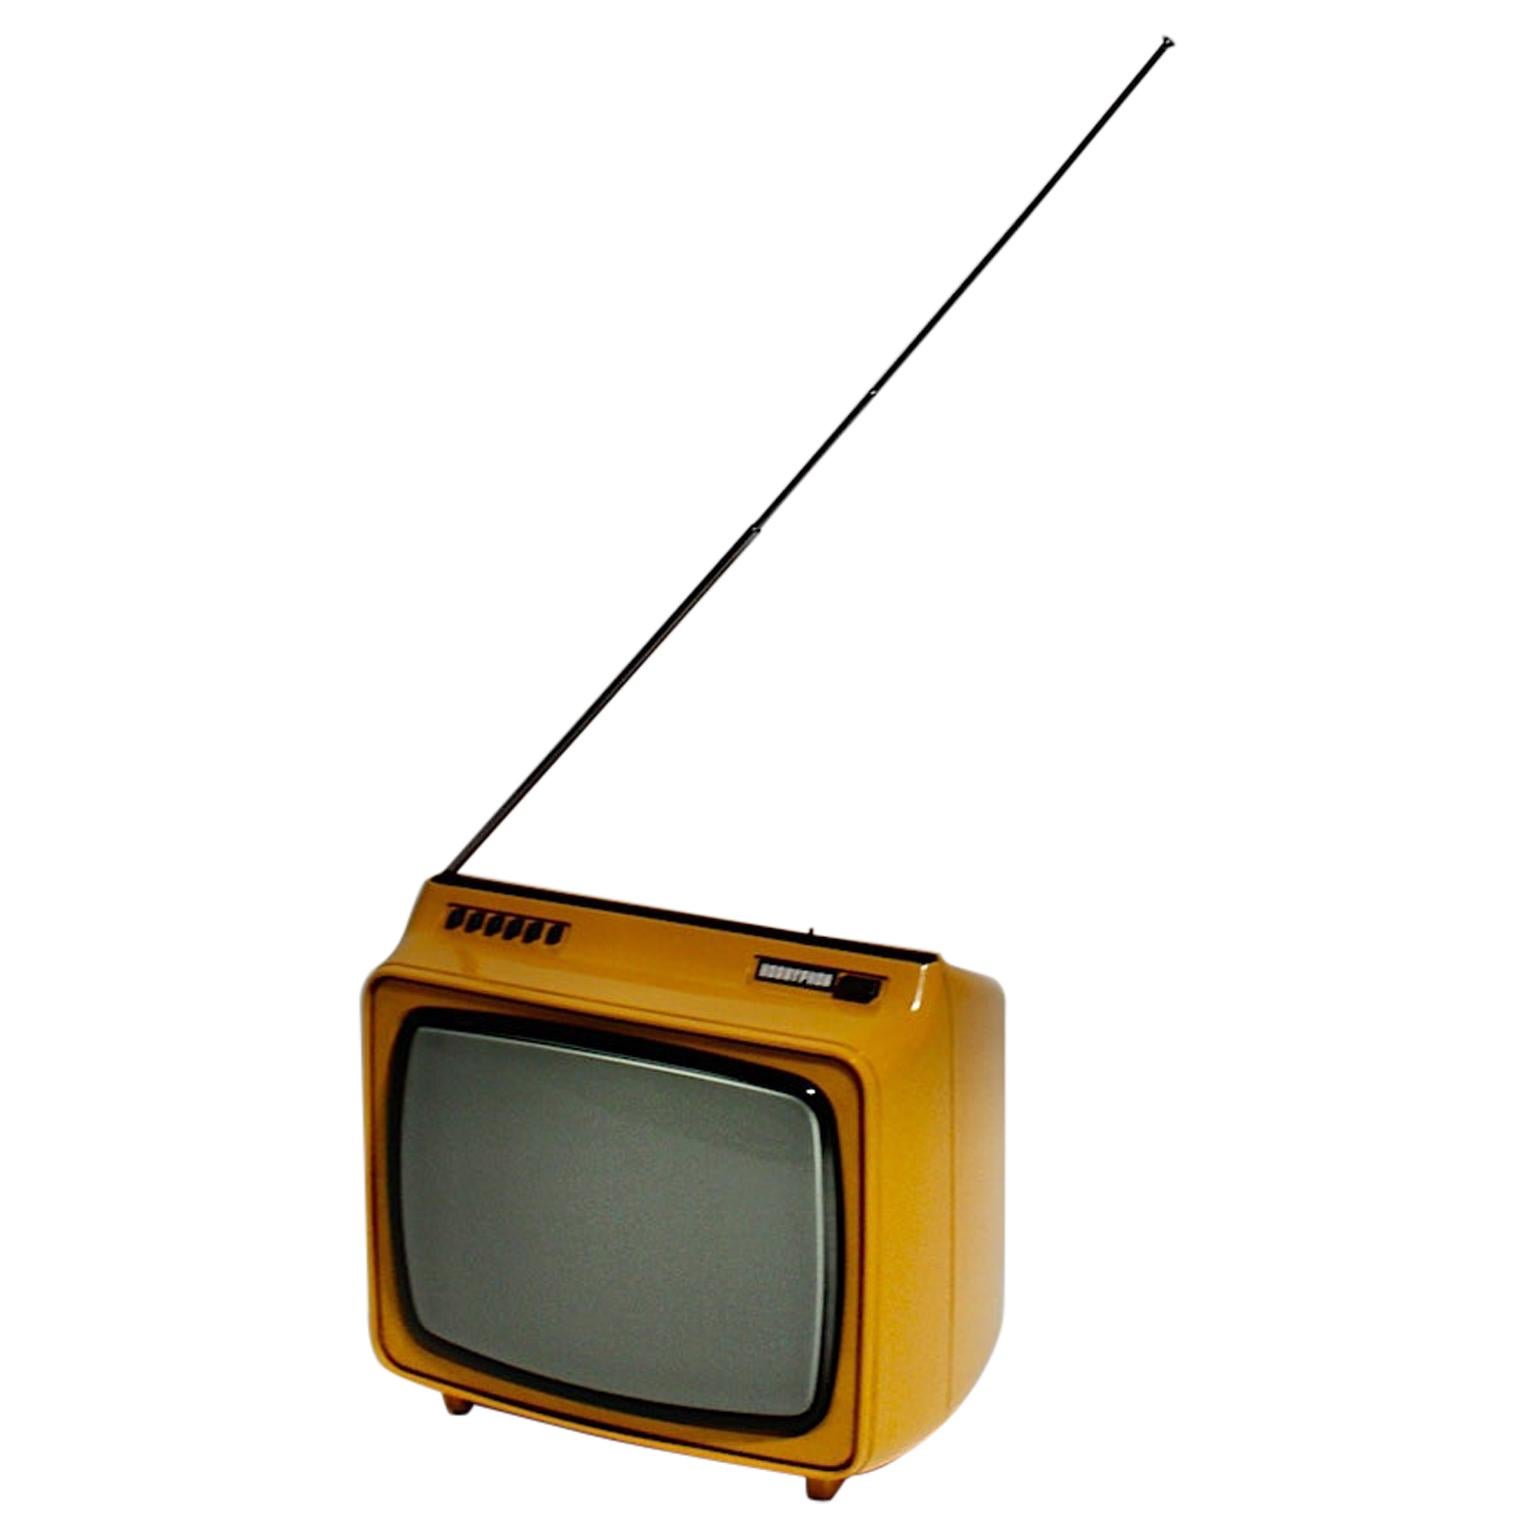 Space Age Yellow Vintage Plastic Television Hornyphon, 1970s, Austria